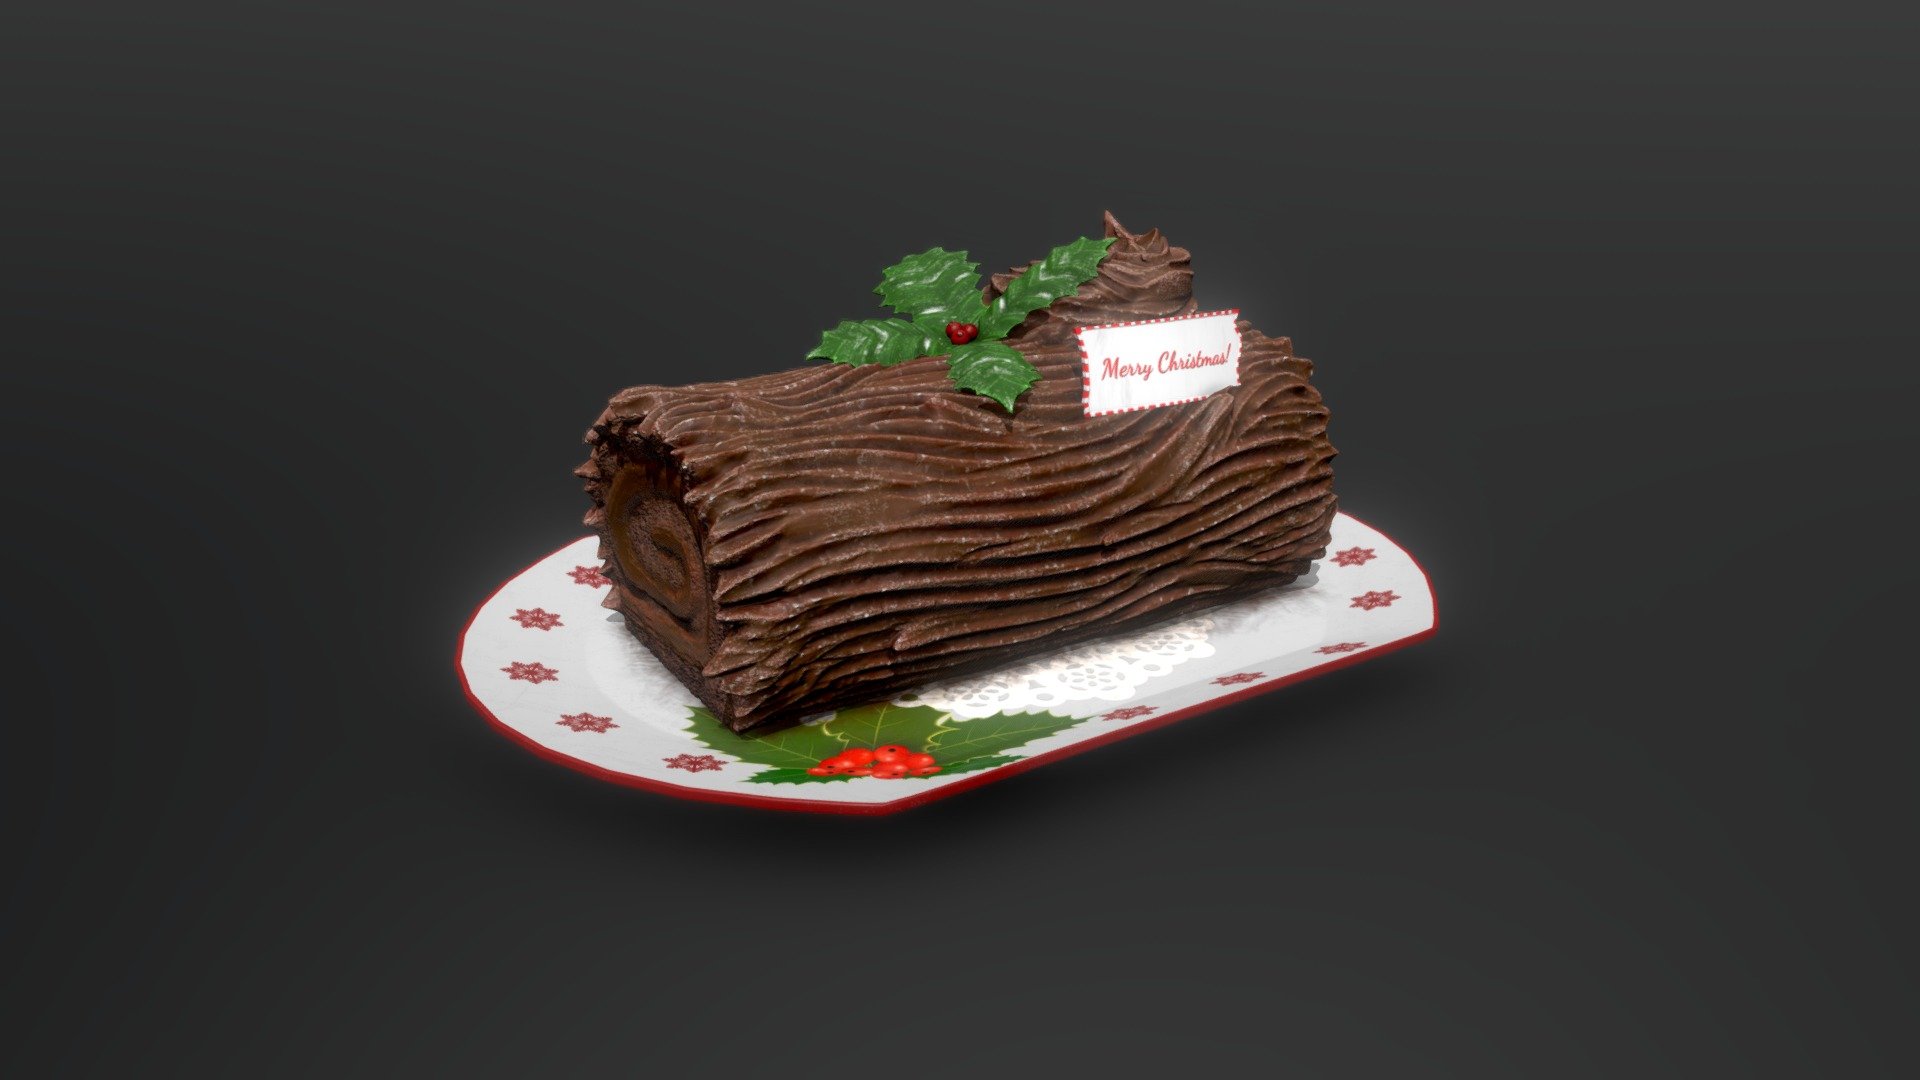 A little pet project that i did for Christmas
Made the Log on ZBrush and the rest in Maya and Substance Painter - Christmas Log - Download Free 3D model by Etienne.Bourdages 3d model